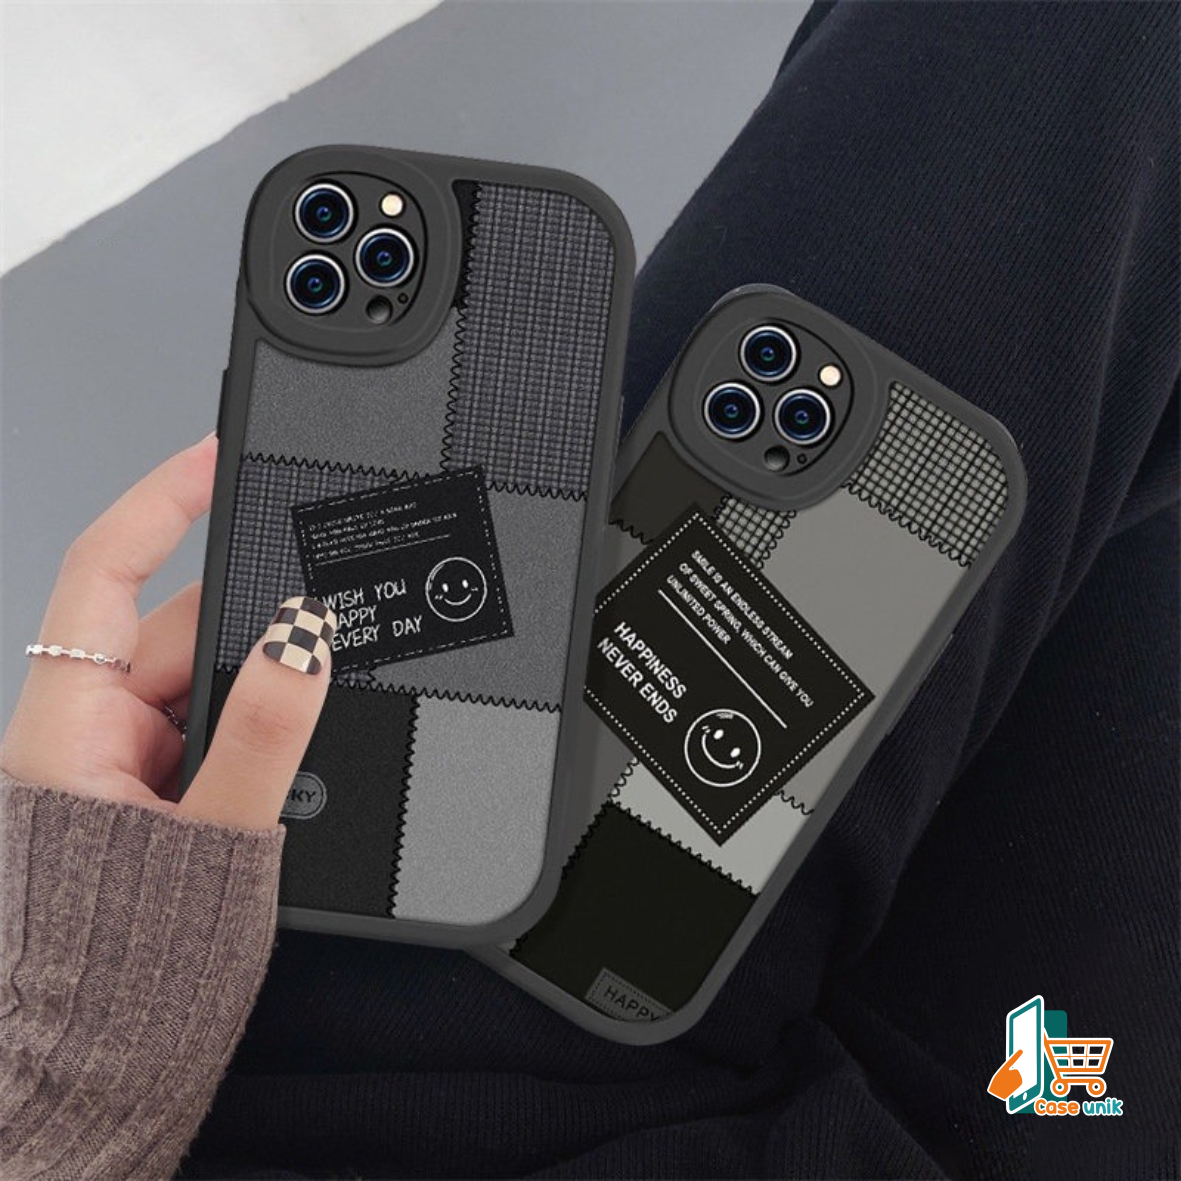 SS818 SOFTCASE SILIKON CASING CUTE SMILE FOR XIAOMI REDMI A1 5A 5+ 6A 8 8A 9A 9C 10A 10 POCO M4 10C C40 12C 11A NOTE 4 4X 12 5A PRIME 7 8 9 10 11 PRO 10S 11S POCO M3 M4 M5 M5S X3 PRO CS5771